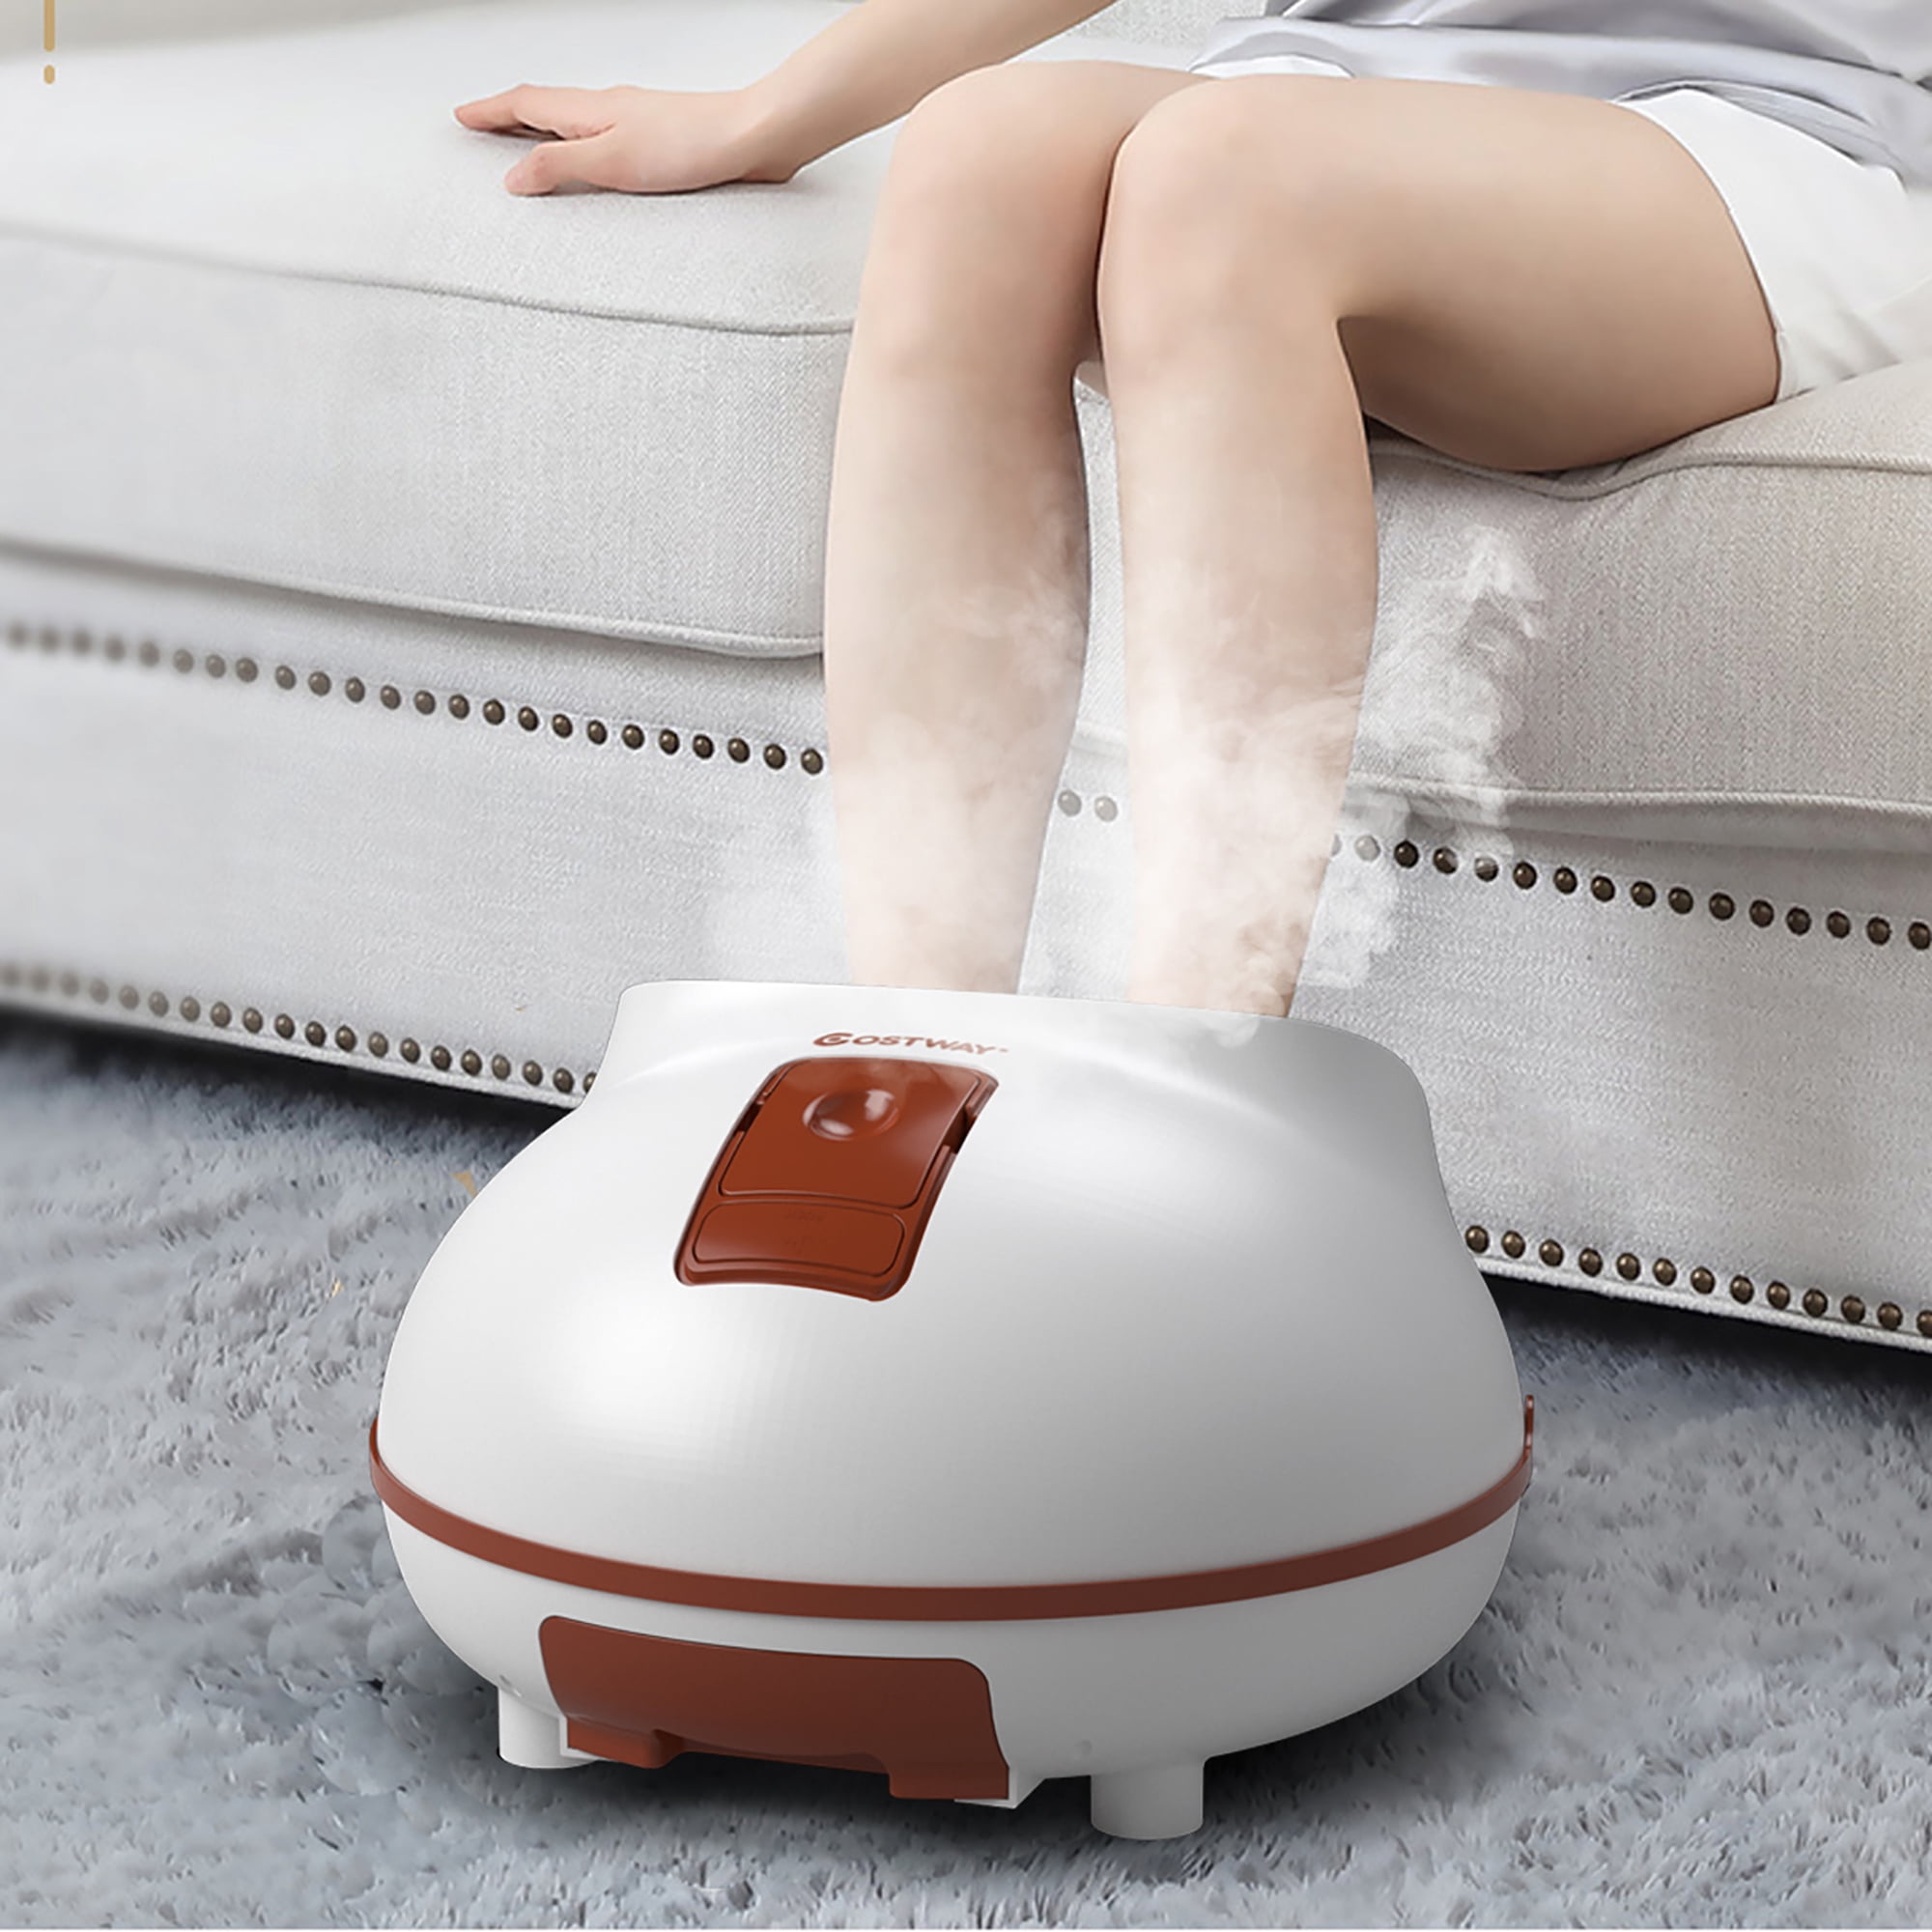 Costway Steam Foot Spa Bath Massager Foot Sauna Care w/ Heating Timer  Electric Rollers Brown | Walmart Canada